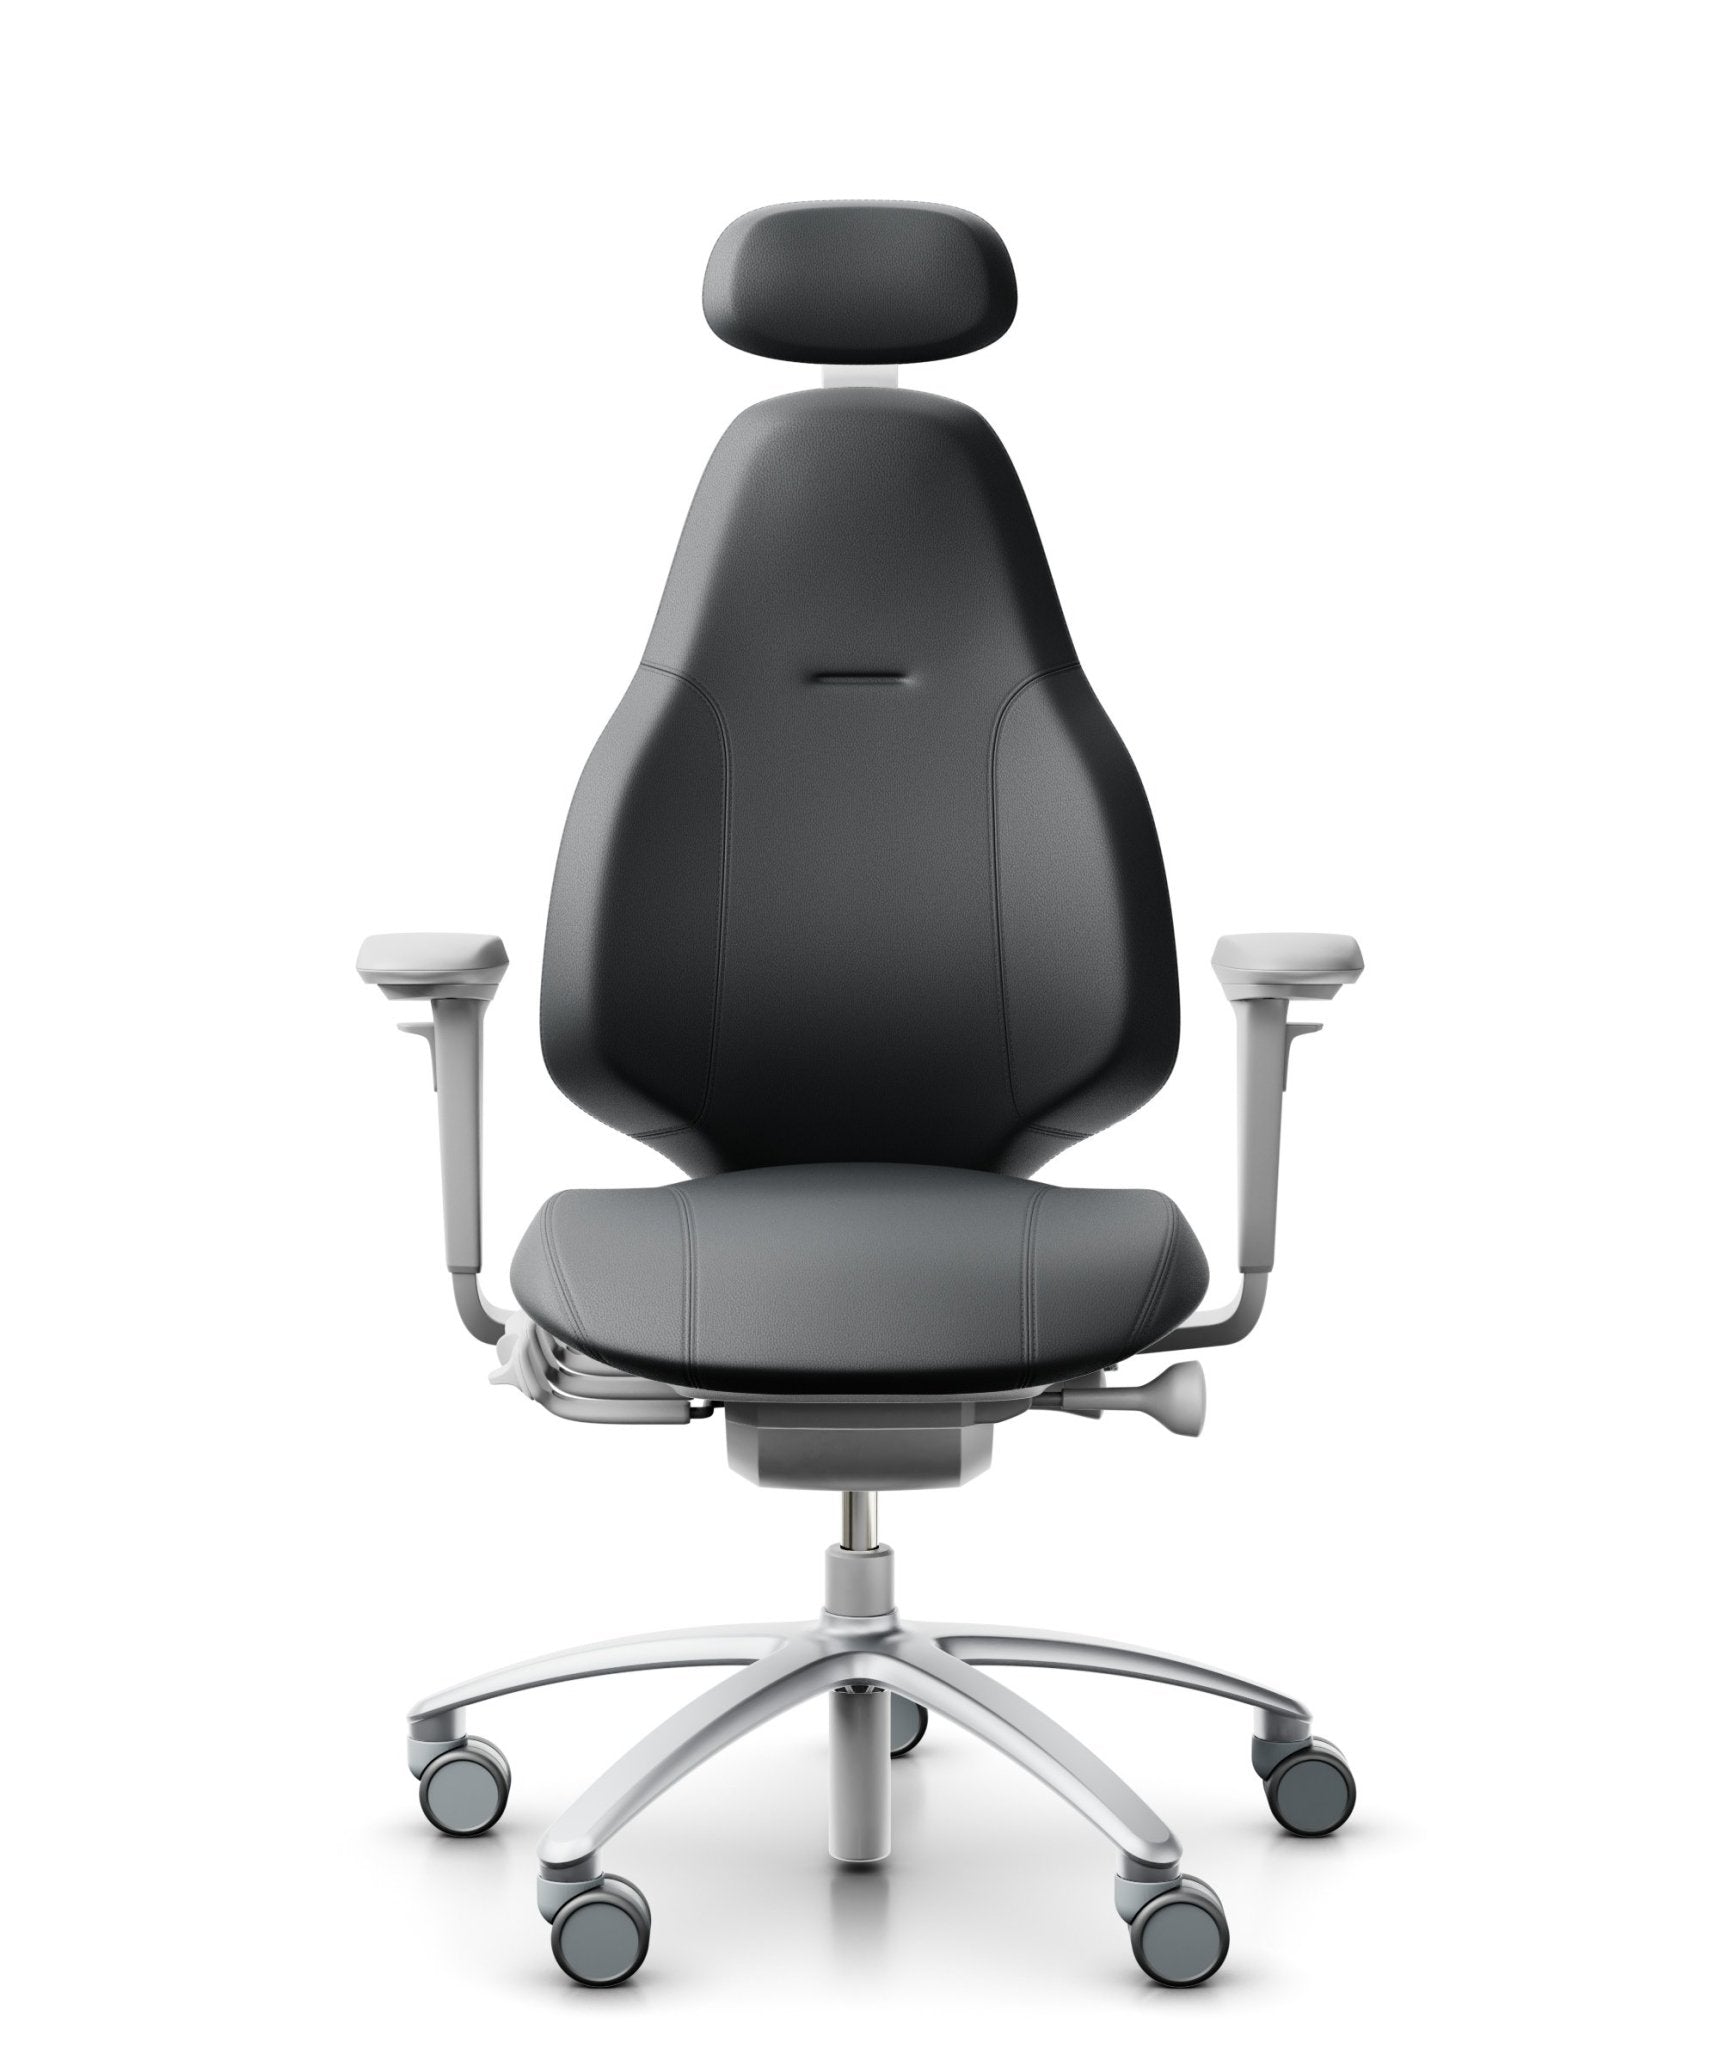 RH Mereo 220 Silver Grey Leather ergonomic office chair